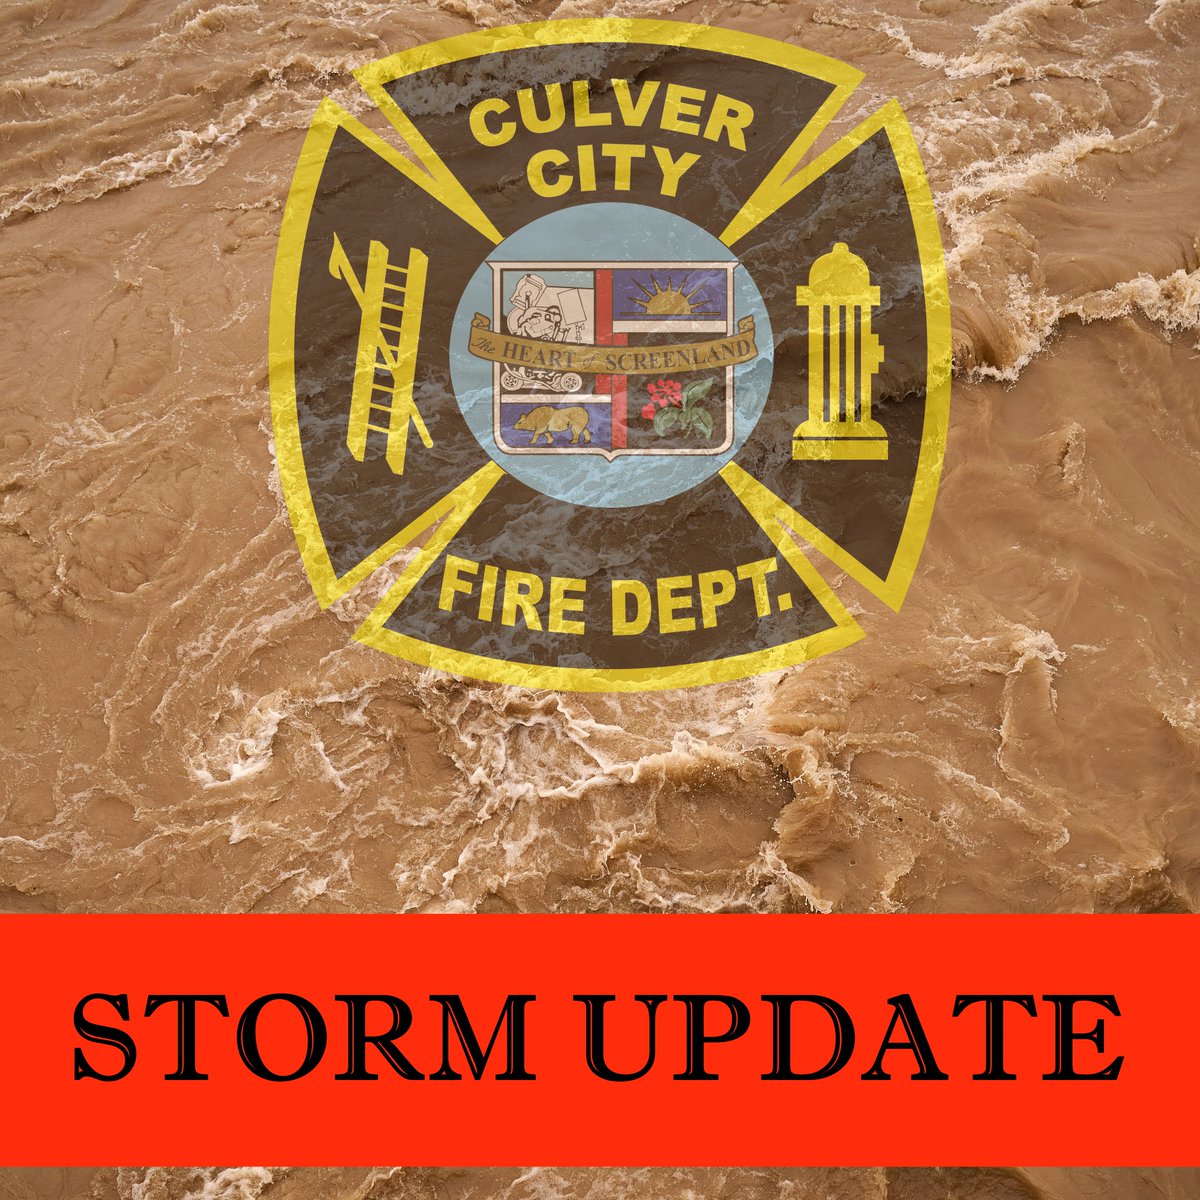 As we make it through one storm, another one is right behind it and now is the time to prepare. We are expecting heavy rains, windy conditions, and higher than normal potential for flooding. Make sure to have a plan ready and visit the link for info - culvercityfd.org/Emergency-Prep…